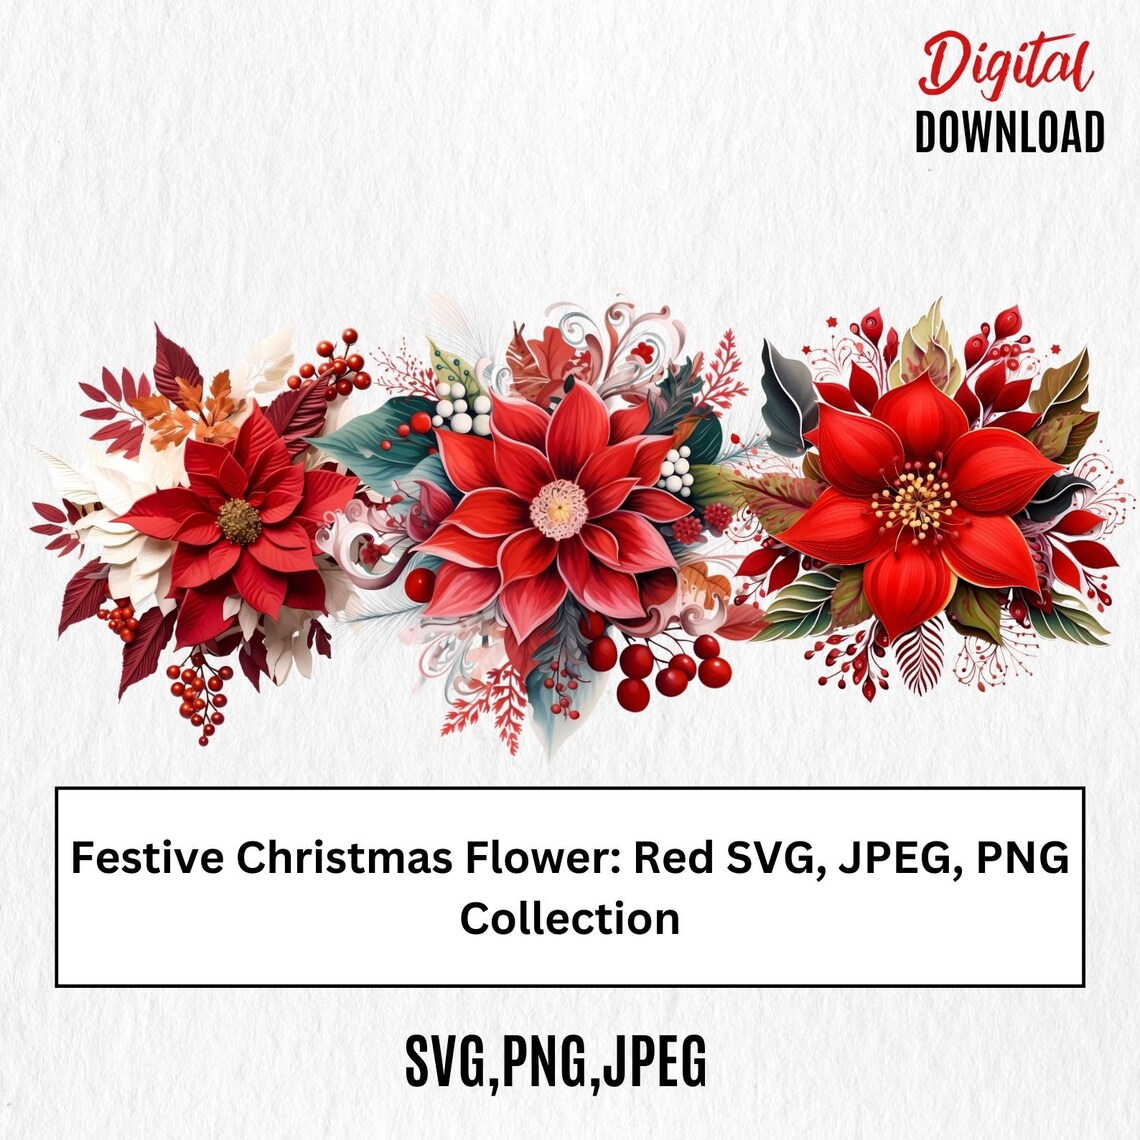 Festive Christmas Flower: Red SVG JPEG PNG Collection - Etsy